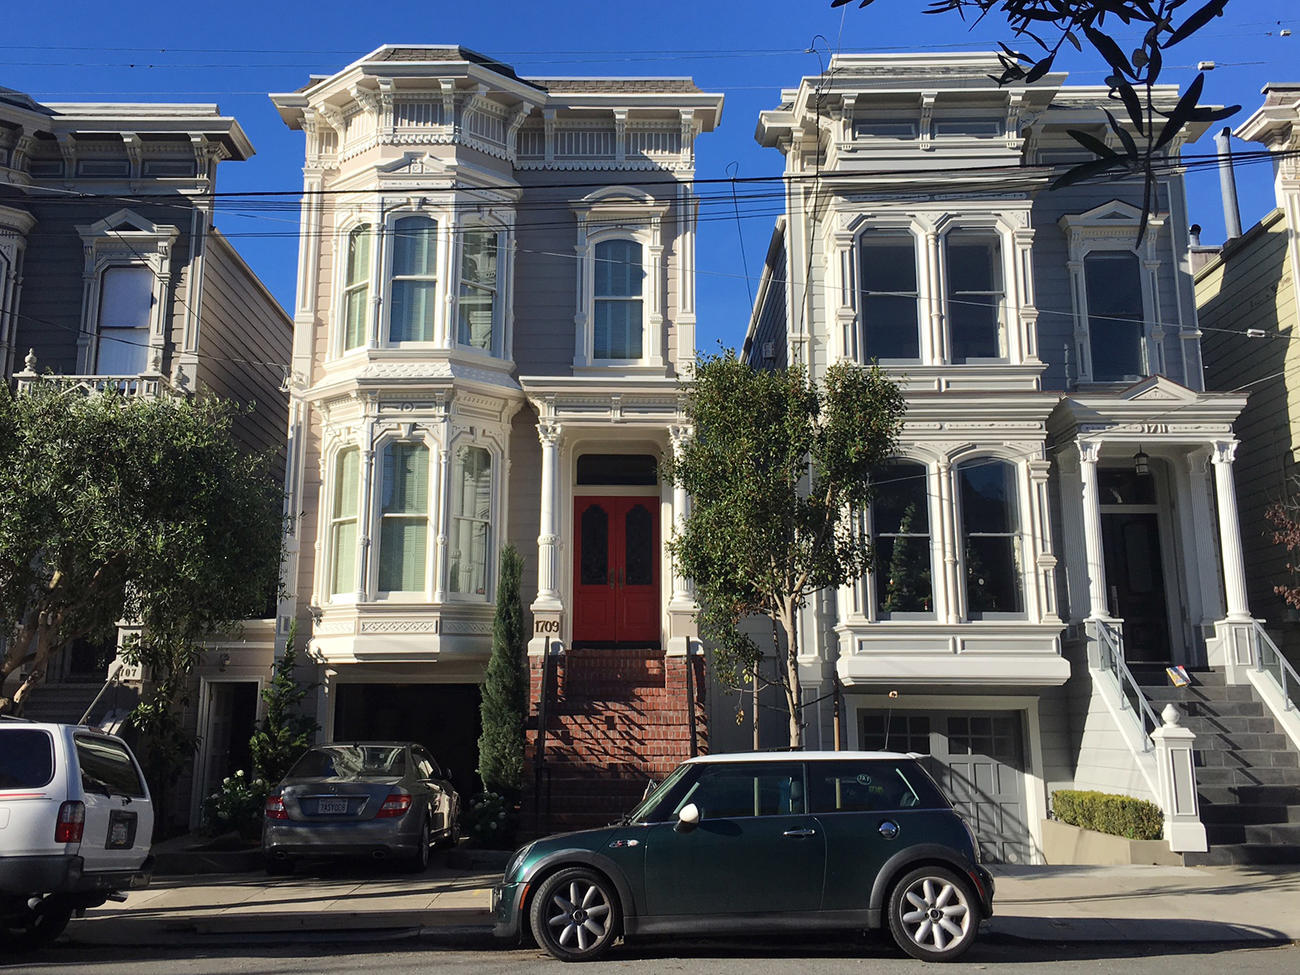 ‘Full House’ Creator Is Buying the Tanner Family House in San Francisco